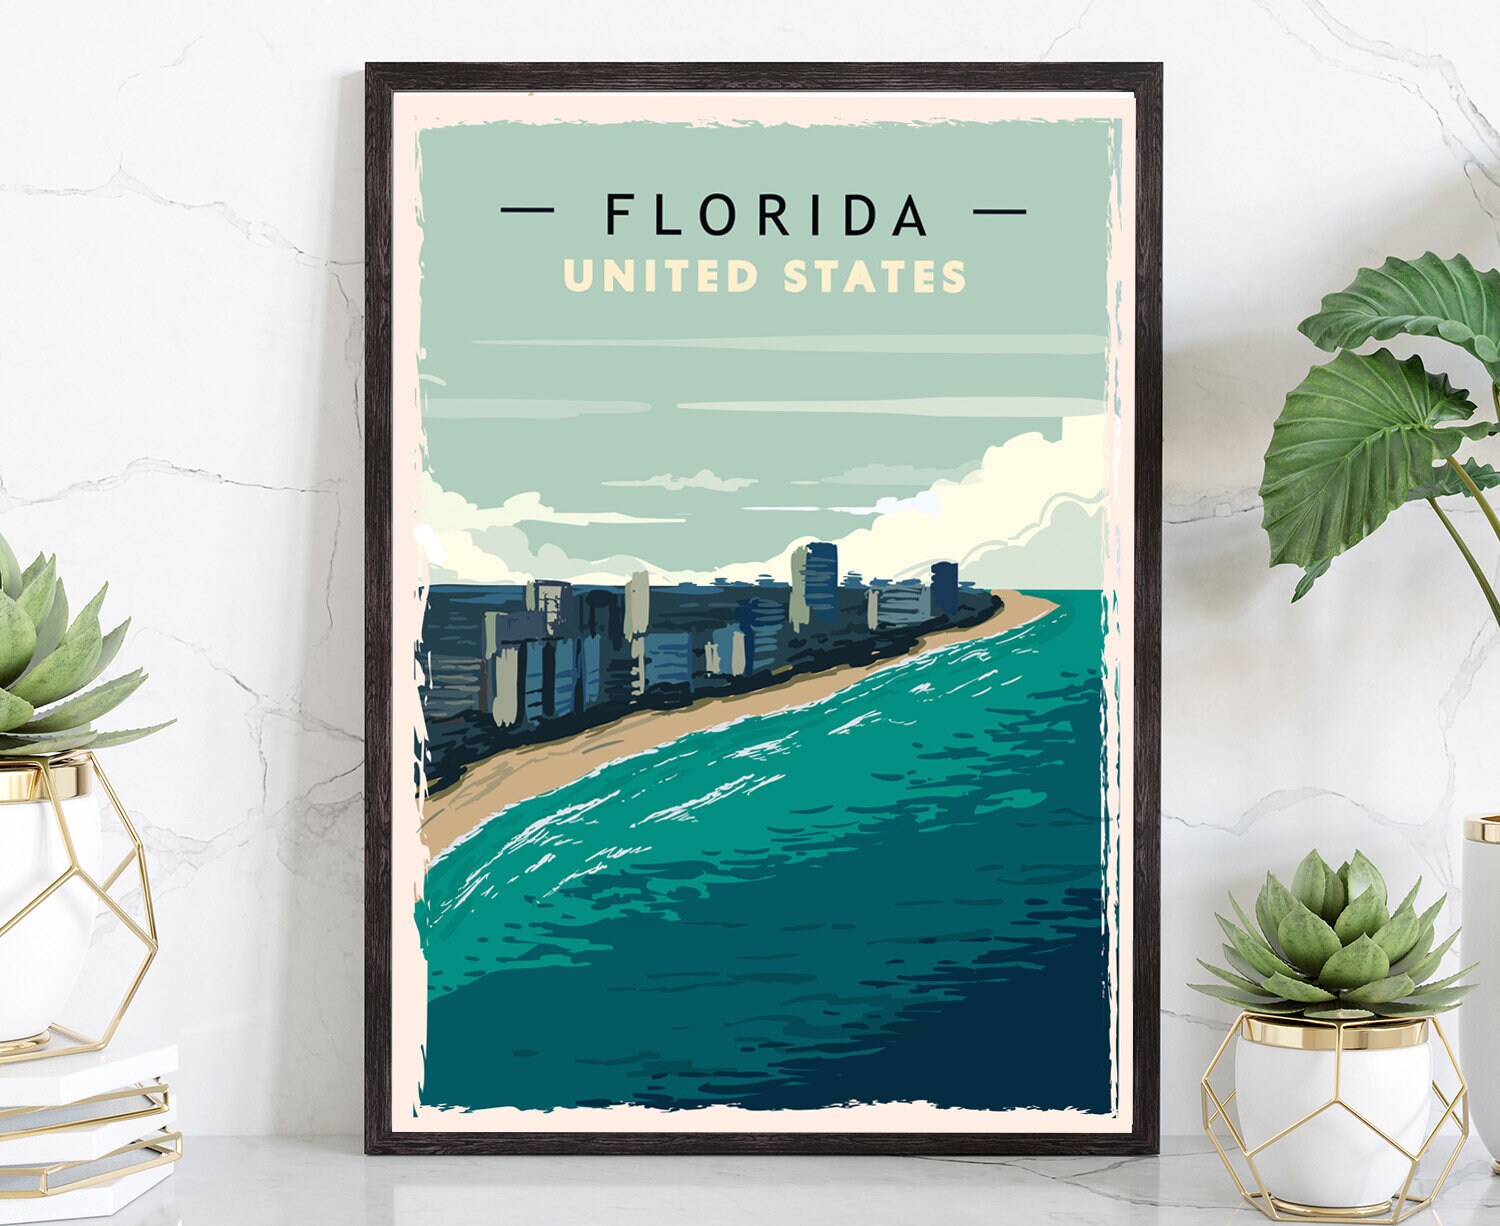 Retro Style Travel Poster, Florida Vintage Rustic Poster Print, Home Wall Art, Office Wall Decor, Poster Prints, Florida, State Map Poster